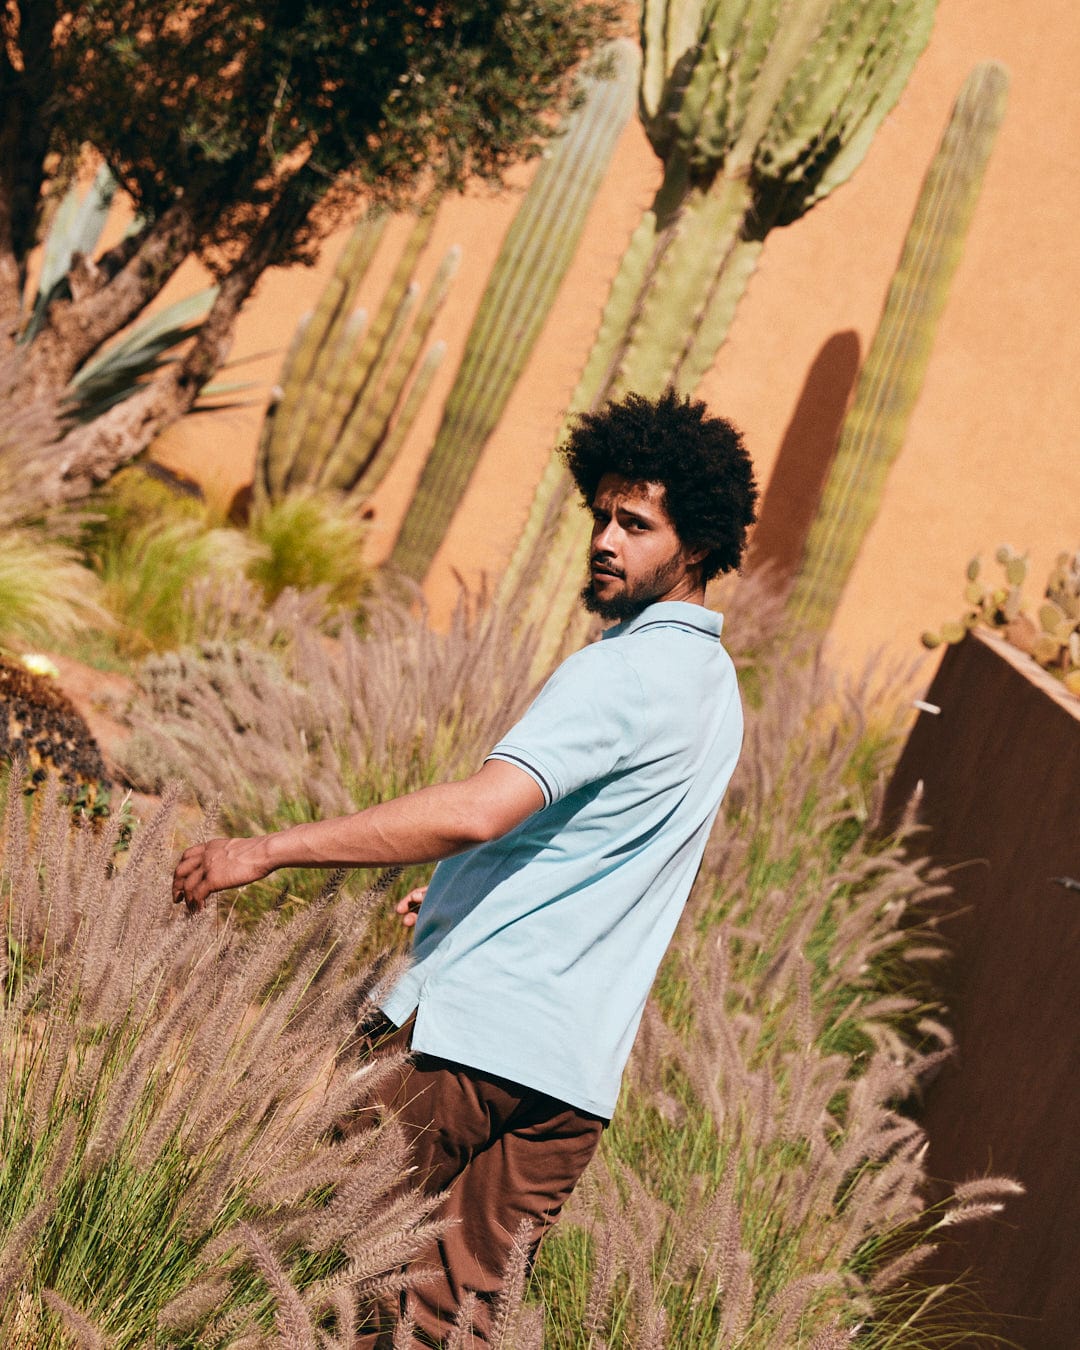 A person in a Strike Logo - Mens Short Sleeve Polo Shirt - Light Blue, featuring the Saltrock embroidered logo, stands among tall grasses, with cacti and an orange wall in the background.